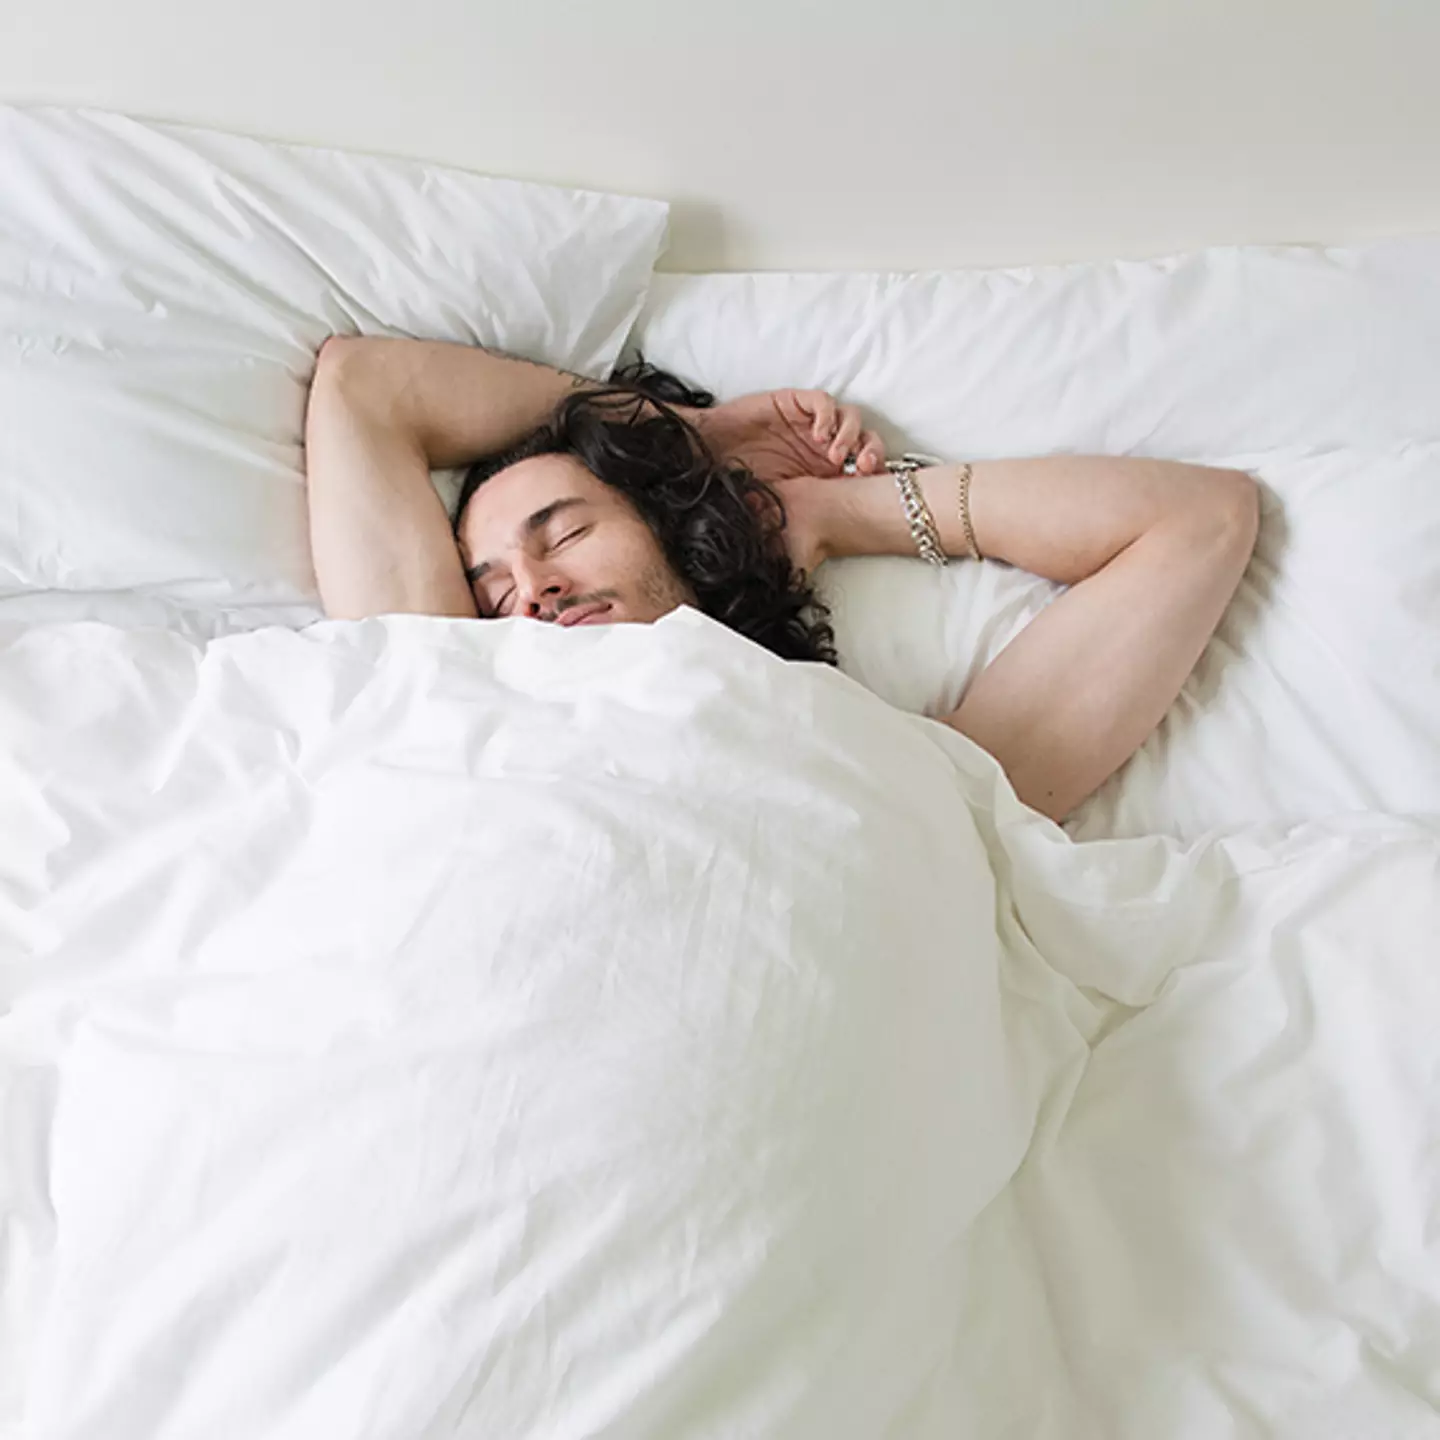 Scientist’s latest research has changed what we thought we knew about lie-ins